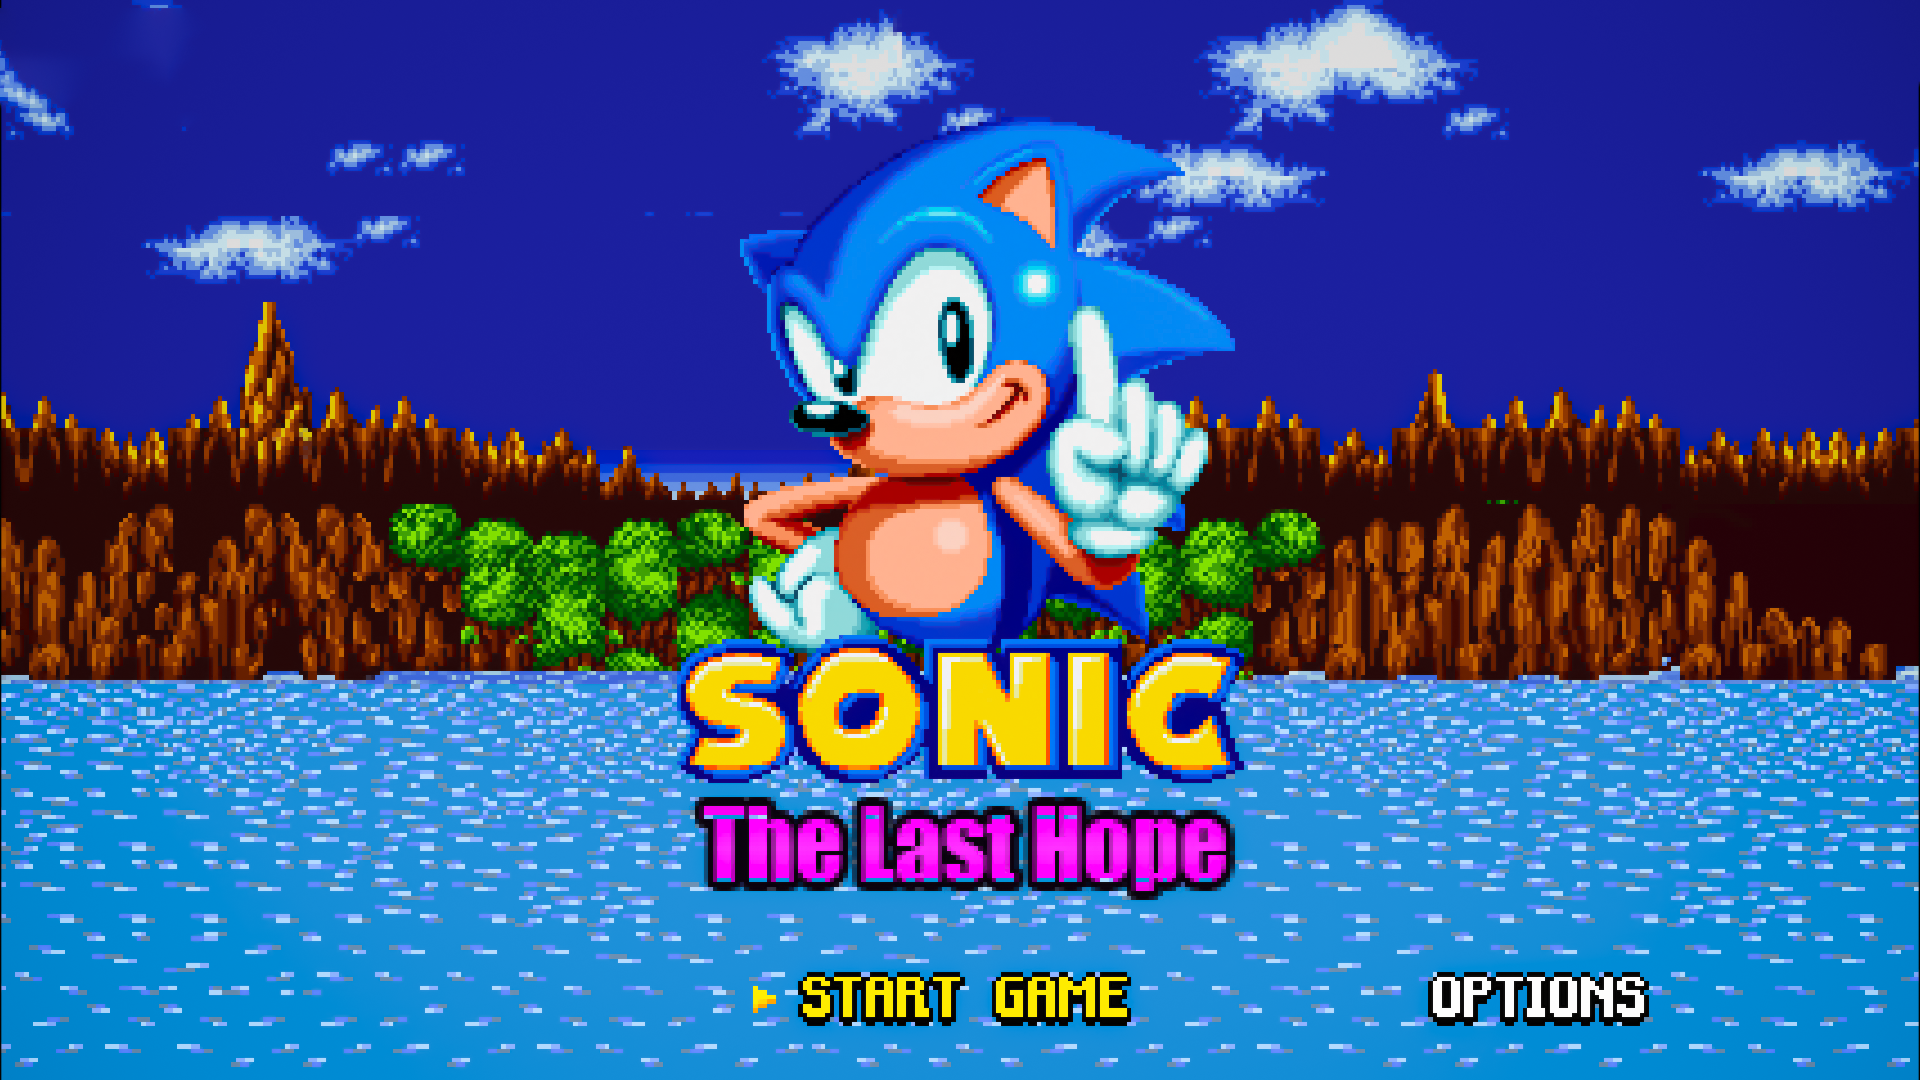 Game Gear - Sonic Blast - Green Hill Zone Act 2 - The Spriters Resource